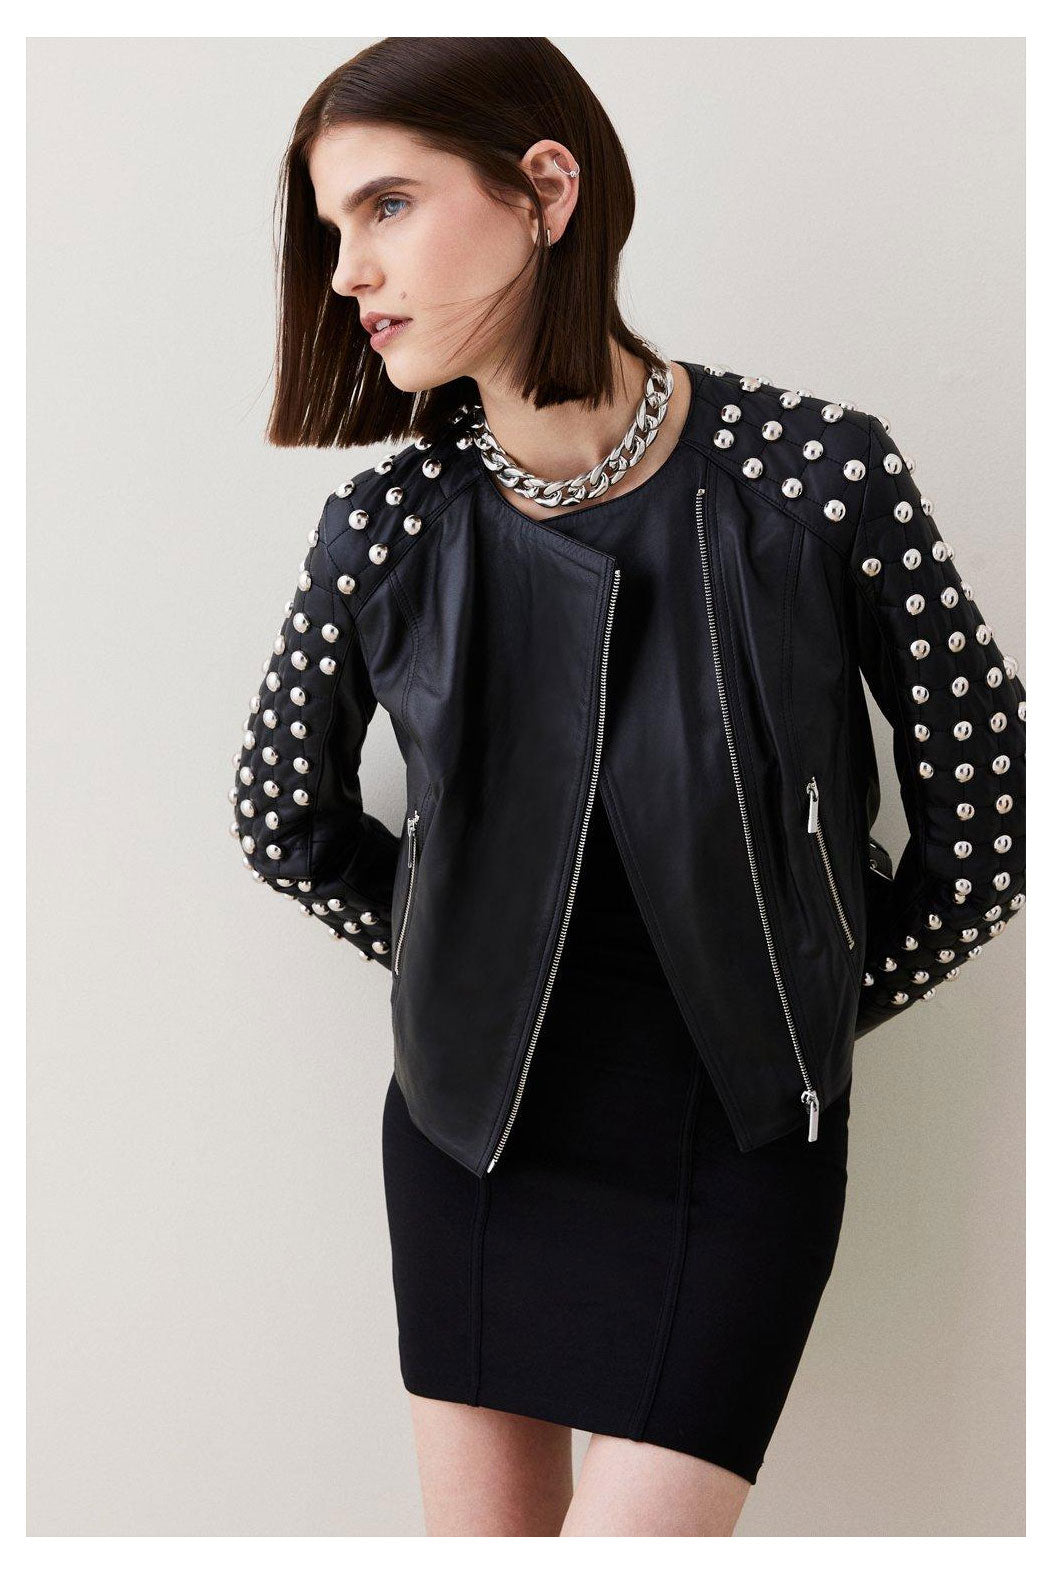 New Women Black Fashion Style Silver Spiked Studded Leather Jacket